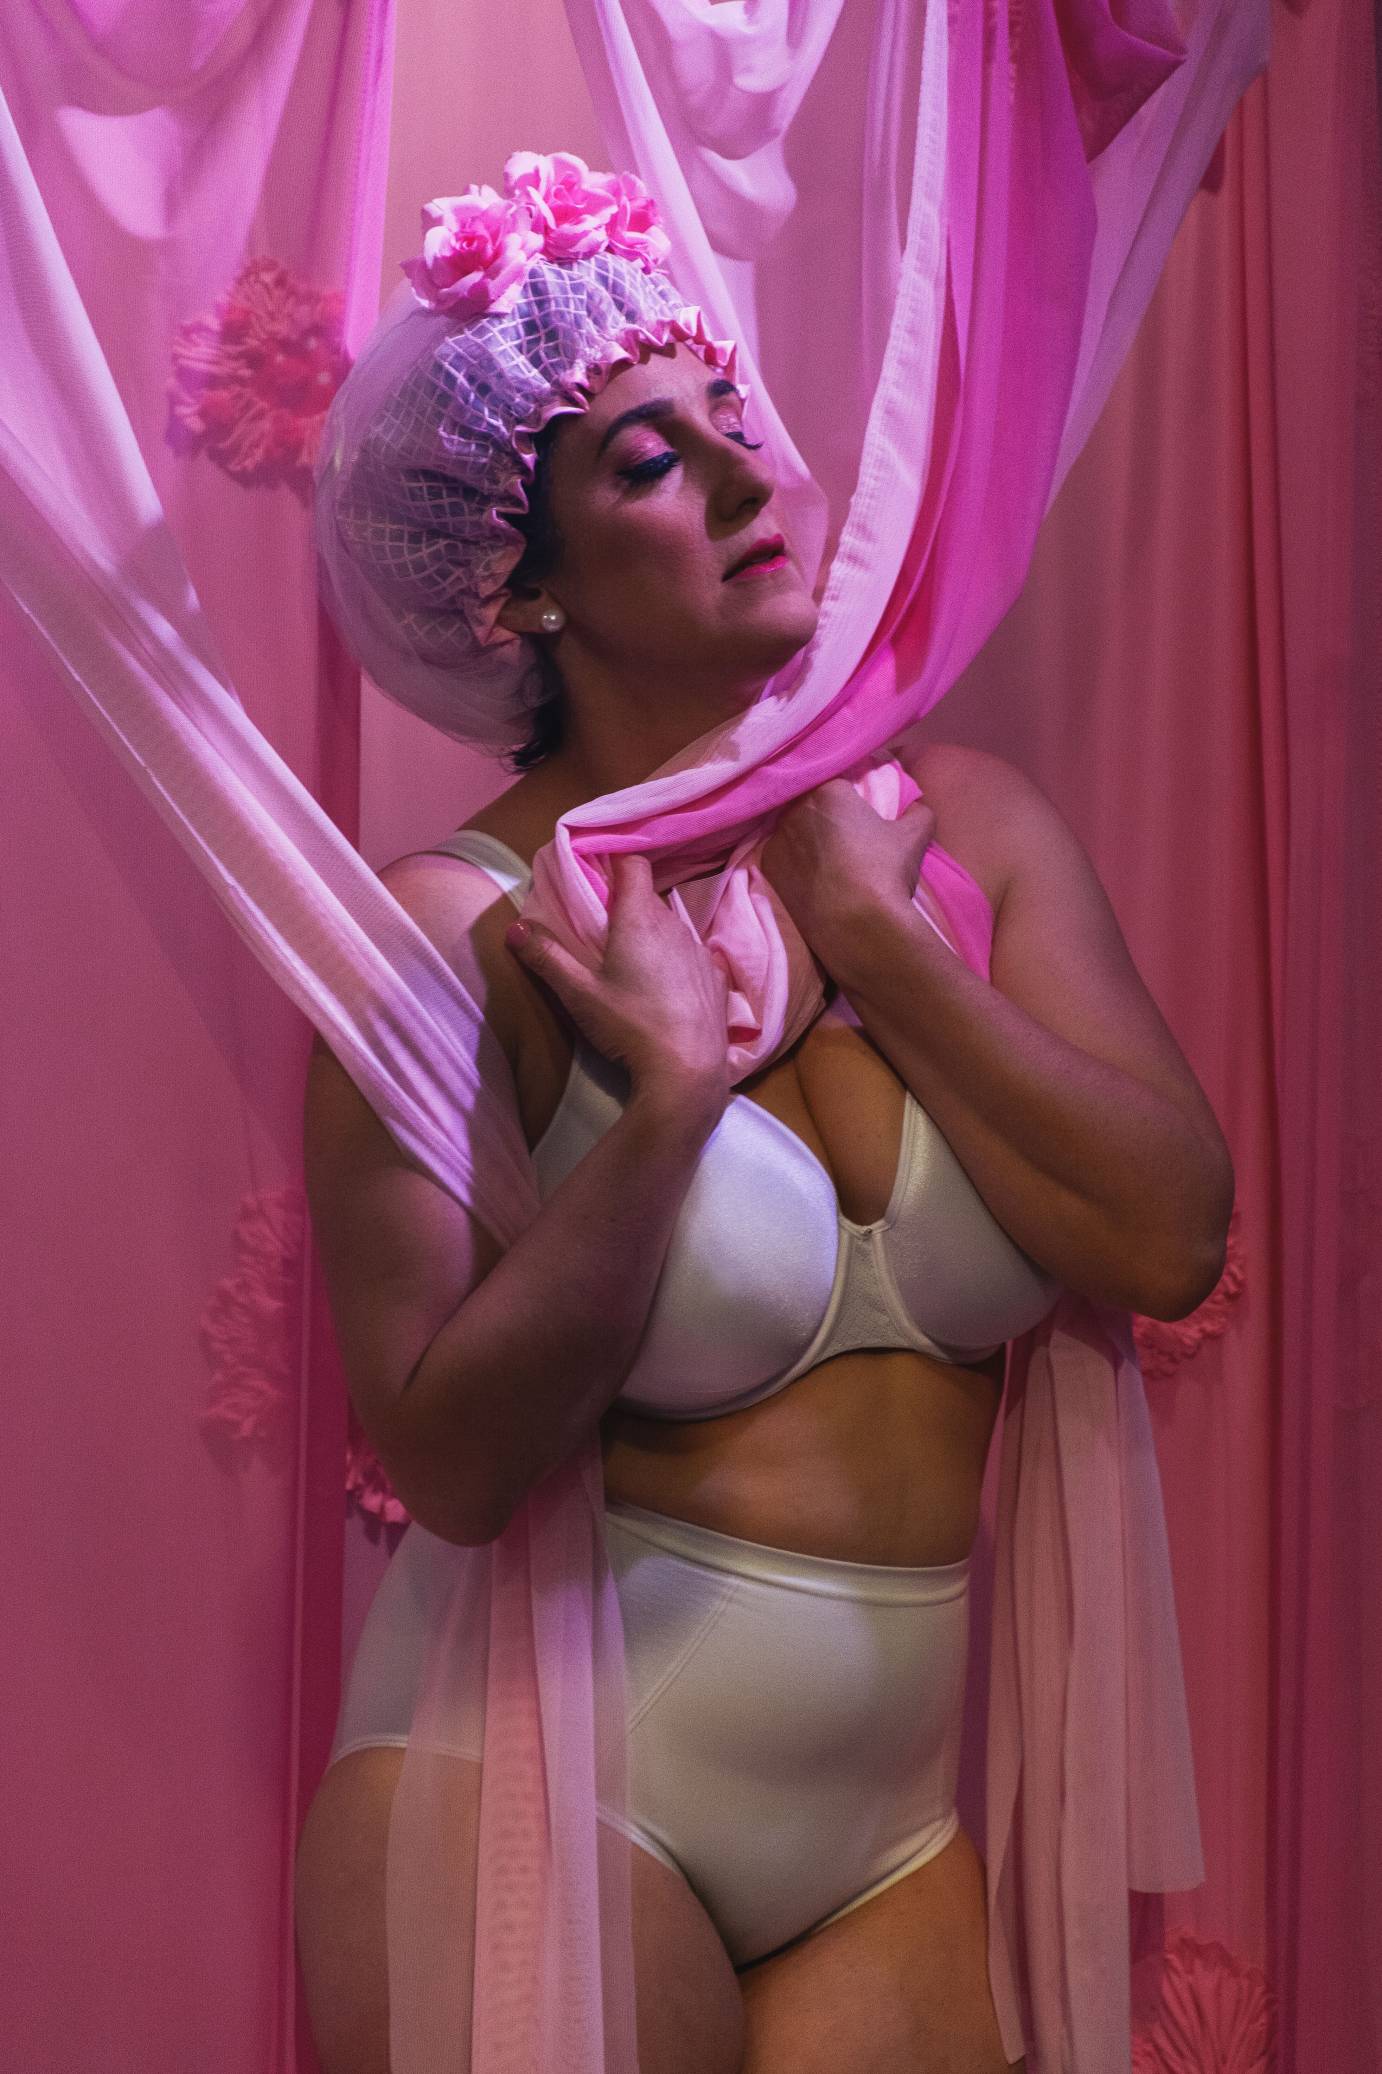 Sara Juli, in bra, panties, and shower cap, holds pink fabric to her chest